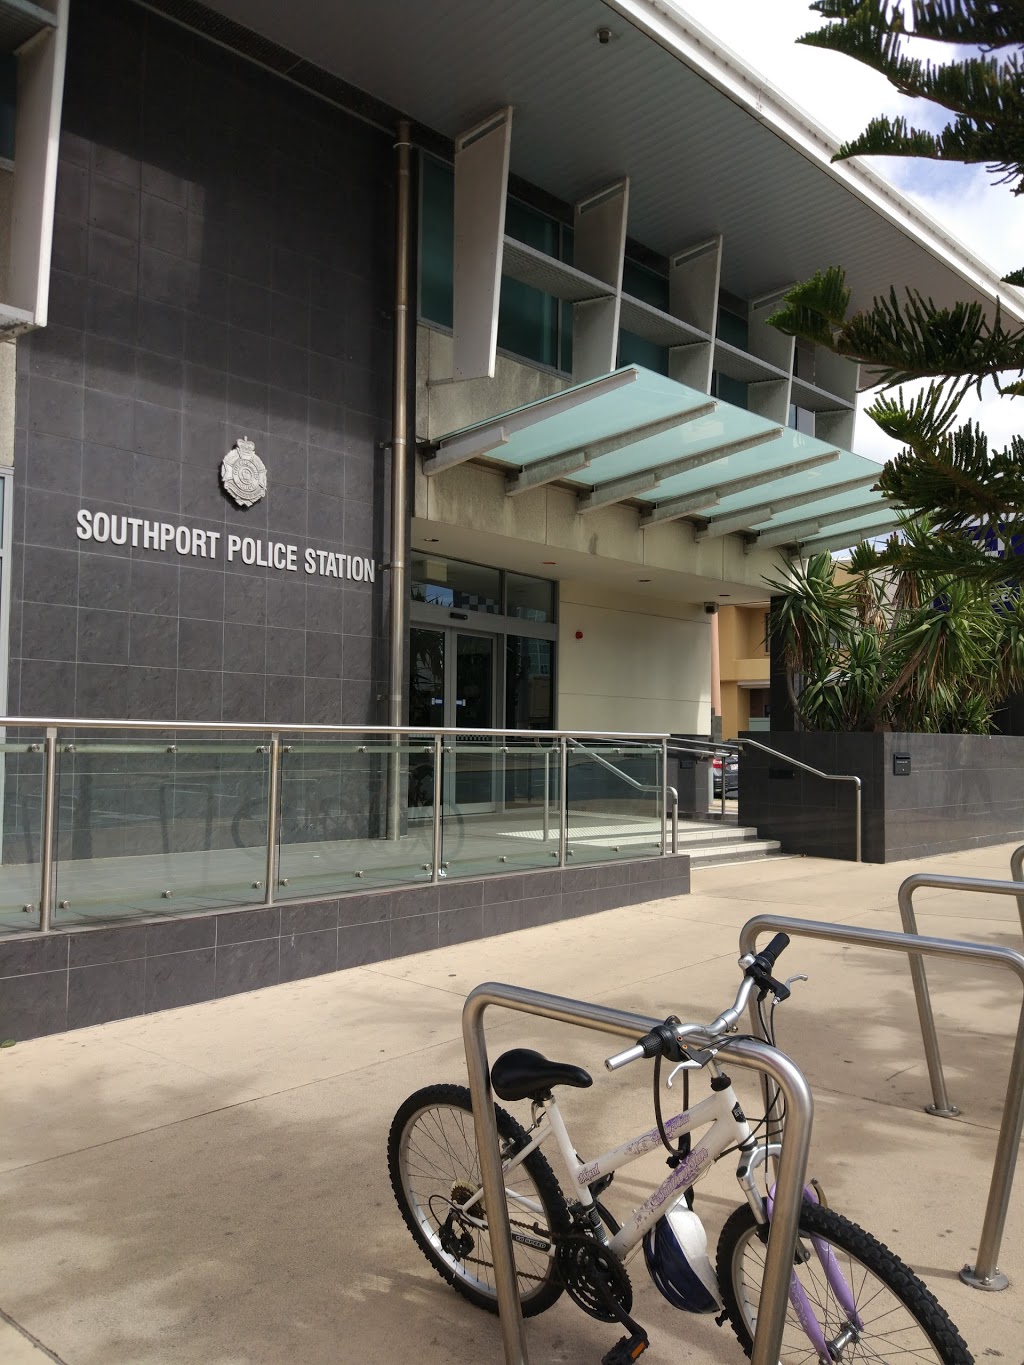 Southport Police Station | police | 96 Scarborough St, Southport QLD 4215, Australia | 131444 OR +61 131444